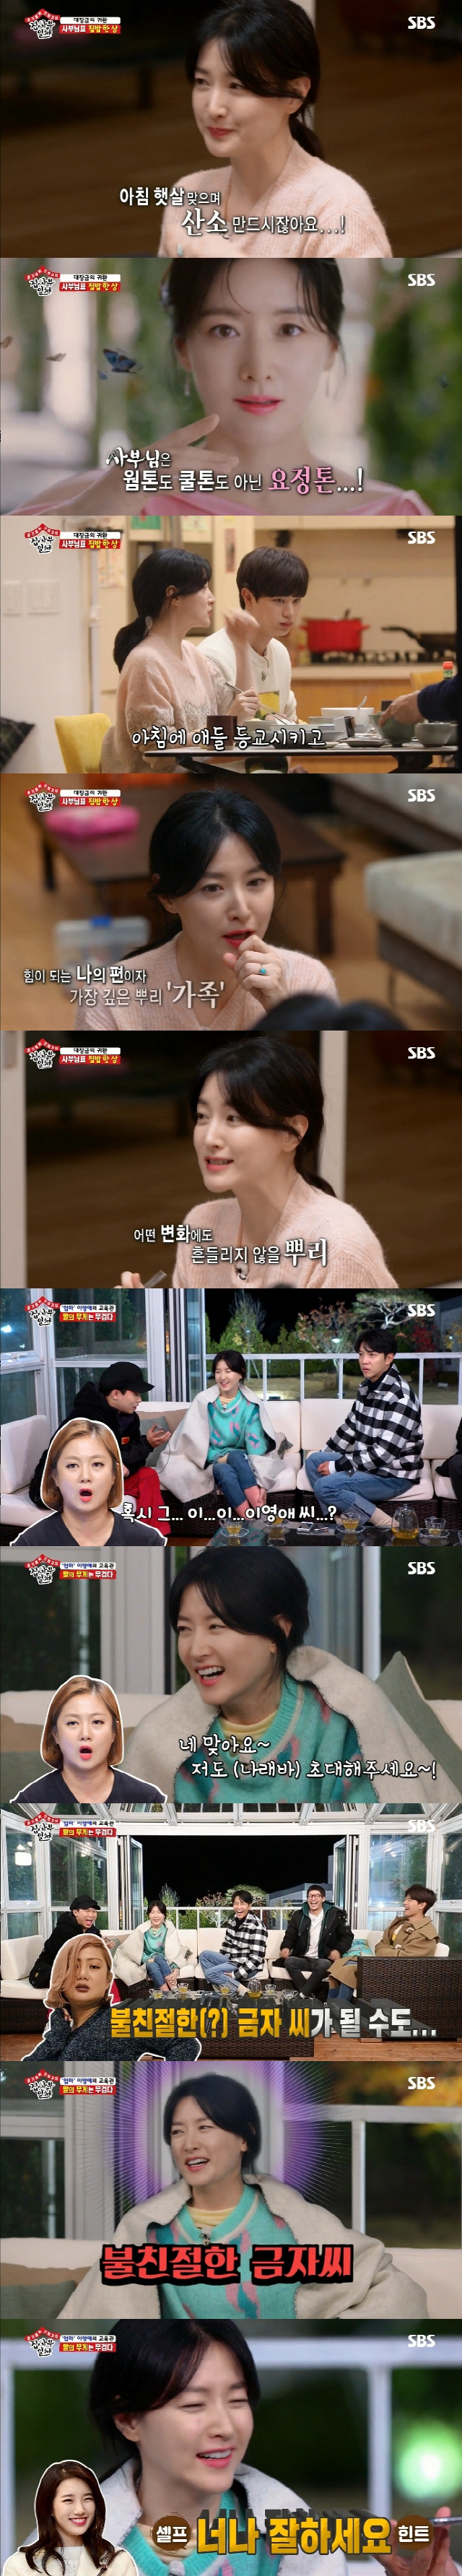 Actor Lee Yeong-ae captivated viewers with unwavering I Musici.On the first day of SBS entertainment All The Butlers, last week, All The Butlers members, Lee Yeong-ae, and children were shown a good time.After a fun class with Master Lee Yeong-aes children, Sung Hyung-jae gathered at the table to eat the rice cooked by the master.In particular, Lee Yeong-ae recommended a Makgeoli drink, and Lee Seung-gi was surprised that until this morning I could not imagine I would eat Makgeoli at Master Lee Yeong-aes house.The members chatted with Master Lee Yeong-aes own oyster cabbage soup, cabbage and Yang Se-hyeong, deliciously eating the radish made with the recipe of the master.Asked about his daily routine, Master Lee Yeong-ae said: I am just like other mothers, I go to school, I meet my mothers, I talk about education, I follow the academy and I fit the childrens schedule.I feel more of the importance of my family because I got married late, he said, and then the question Did you have any fear of marriage? Not at all.In my 20s and 30s, I had such an anxiety, and the more I thought about making my roots, I ran hard. When the members asked what kind of work was rooted, they surprised everyone by telling the unexpected answer that the works that failed and ended early became nourishing.Above all, Master Lee Yeong-ae emphasized the importance of praise.He said, I love you, thank you, he said. I am most pleased with the praise of the children who say, The food that my mother gives me is delicious. Lee Yeong-ae added, You should not be able to express it in words, so you always emphasize pretty words and practice them.The members decided to have time to praise each other by calling their acquaintances in the teachings of Master Lee Yeong-ae.Yang Se-hyeong showed Park Na-rae, Lee Seung-gi called Bae Suzy and gave a warm praise that he had not been able to do.Among them, Master Lee Yeong-ae asked for an invitation to Naraba in a telephone conversation with Park Na-rae, and Park Na-rae said, If you come to my house, you can become an unfriendly Mr.Also, he showed a good ambassador in the movie Good You Do It to Bae Suzy who does not recognize himself, and made everyone laugh.Is it because of Lee Yeong-aes performance? All The Butlers recorded 8.4% of household TV viewer ratings (based on Nielsen Korea, the second part of the metropolitan area).Target TV viewer ratings of 2049, which were for young viewers aged 20 to 49, were 3.3%, while top TV viewer ratings per minute soared to 10.5%.